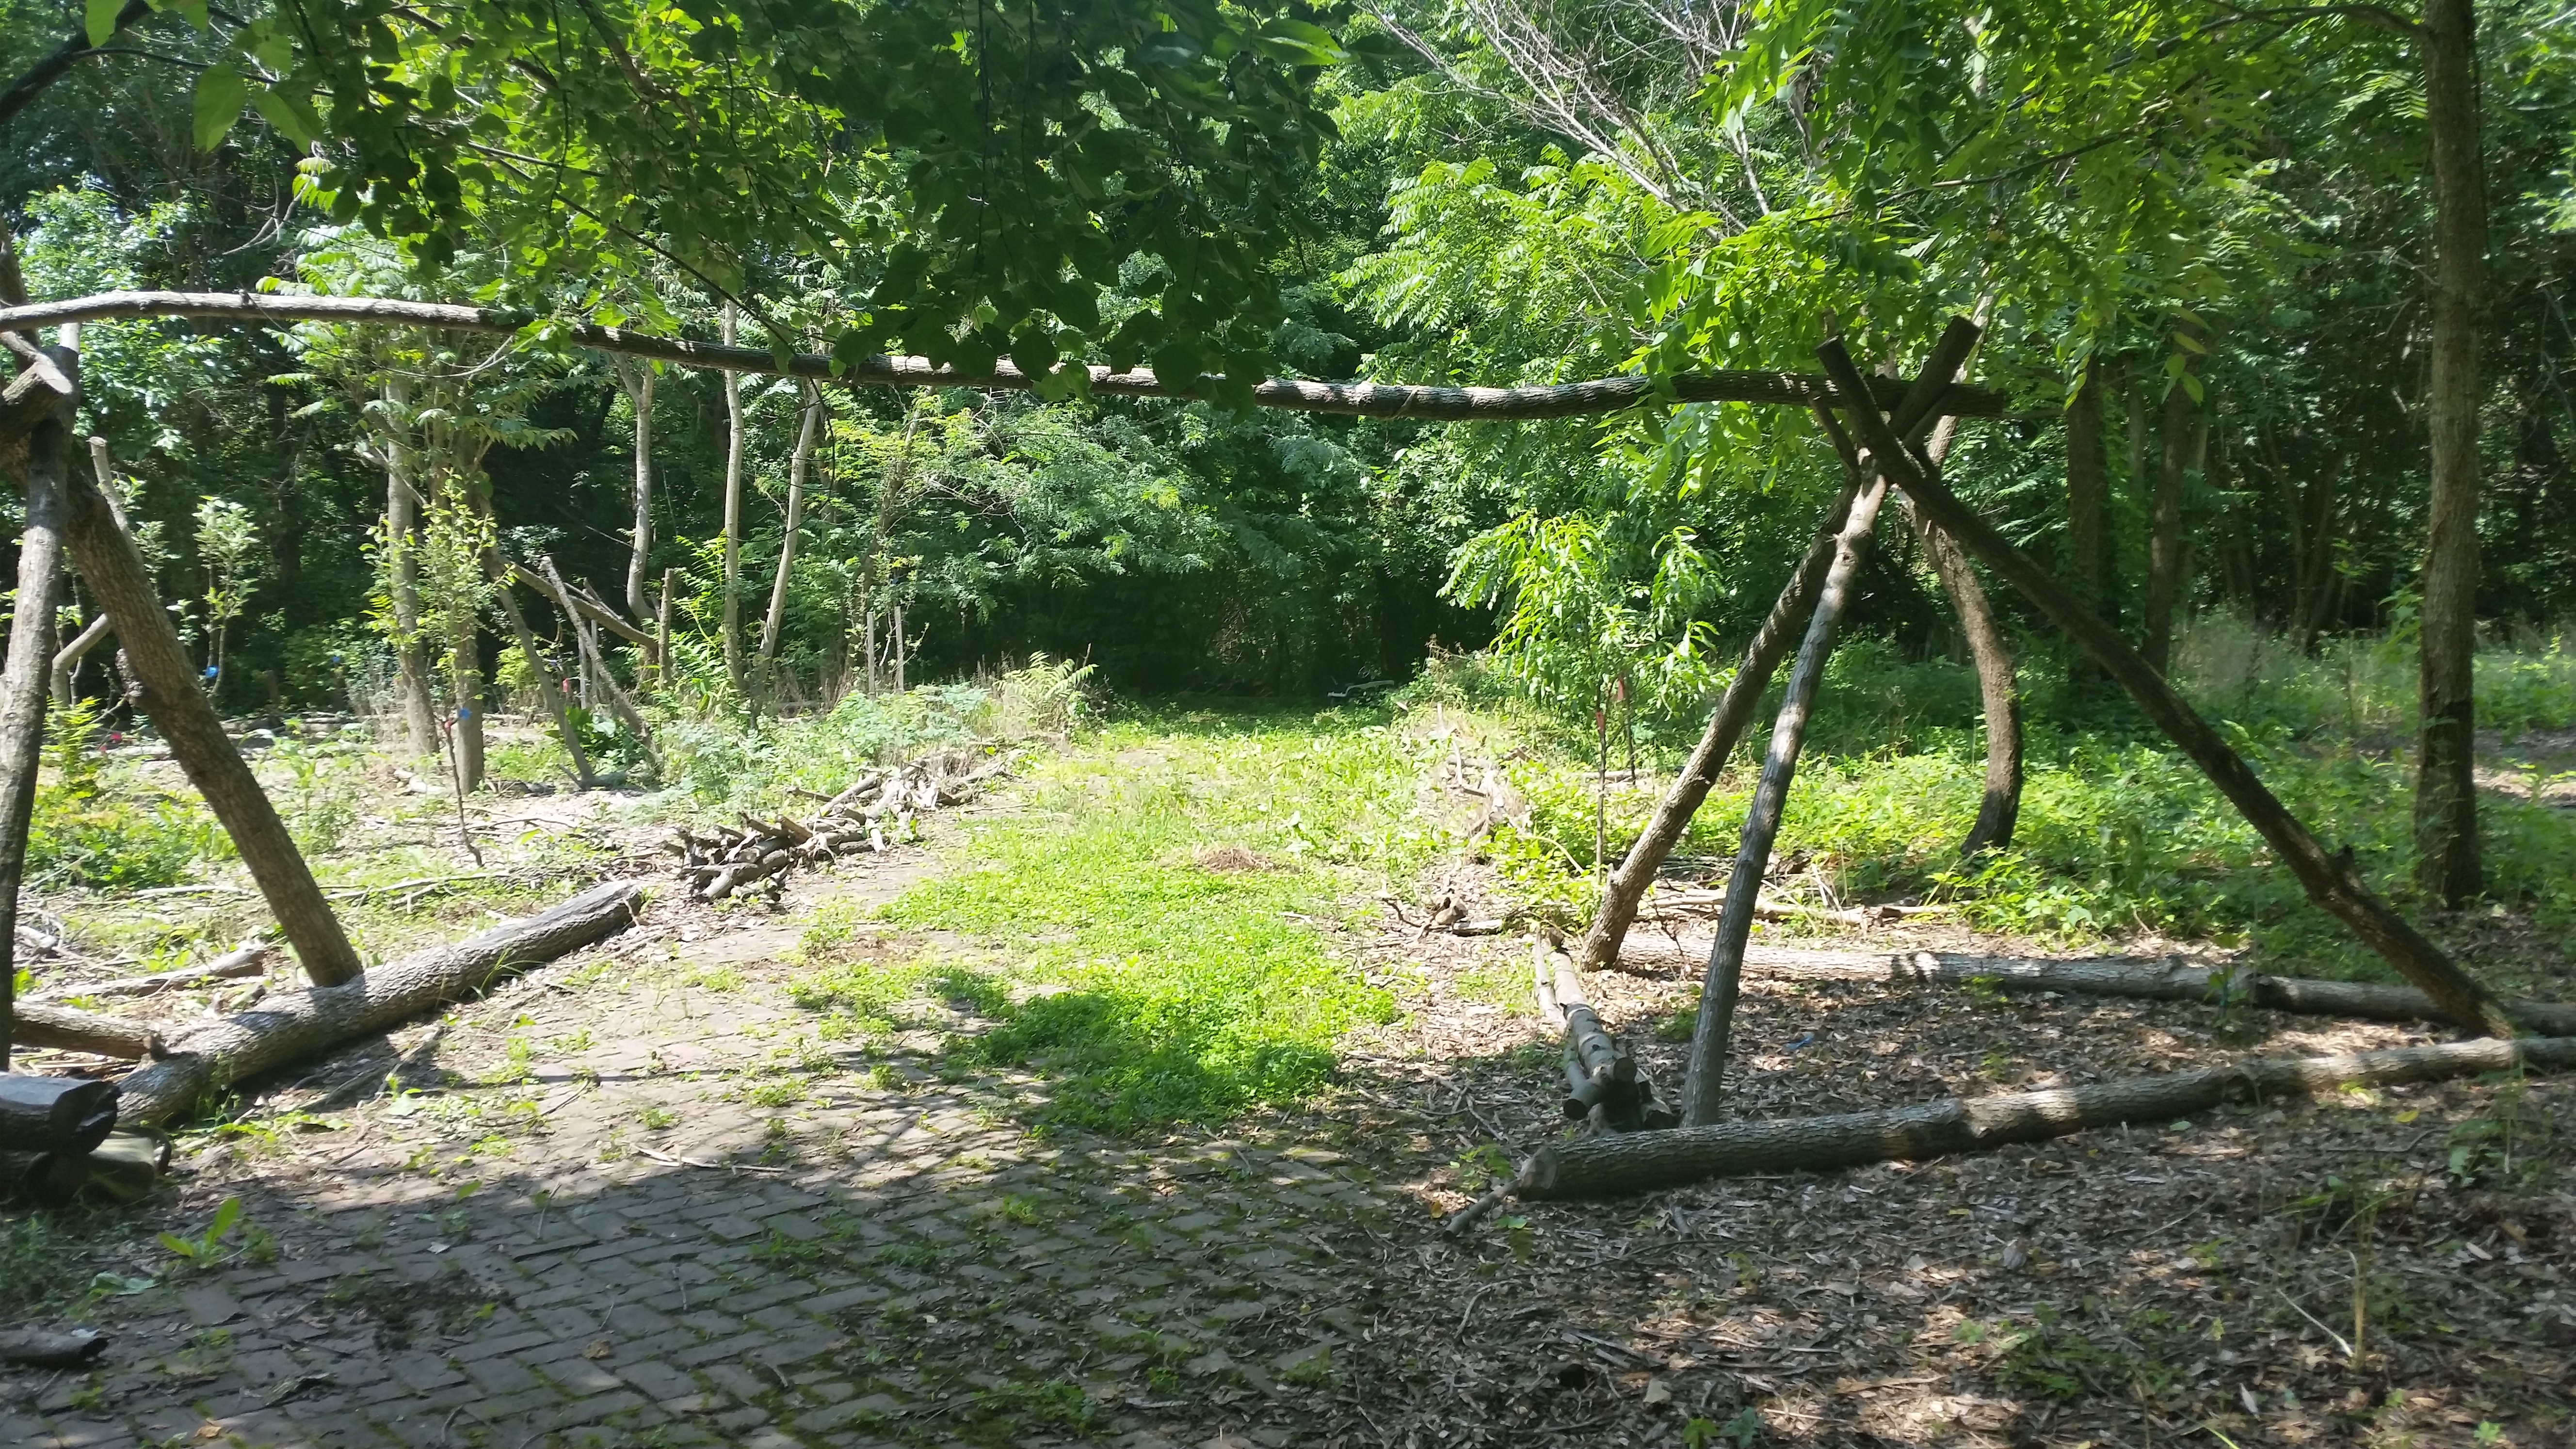 An image from the entrance of the food forest showing the dense canopy of trees, a brick path from the human impacts, and rustic structures built by Charm City Farms staff and volunteers